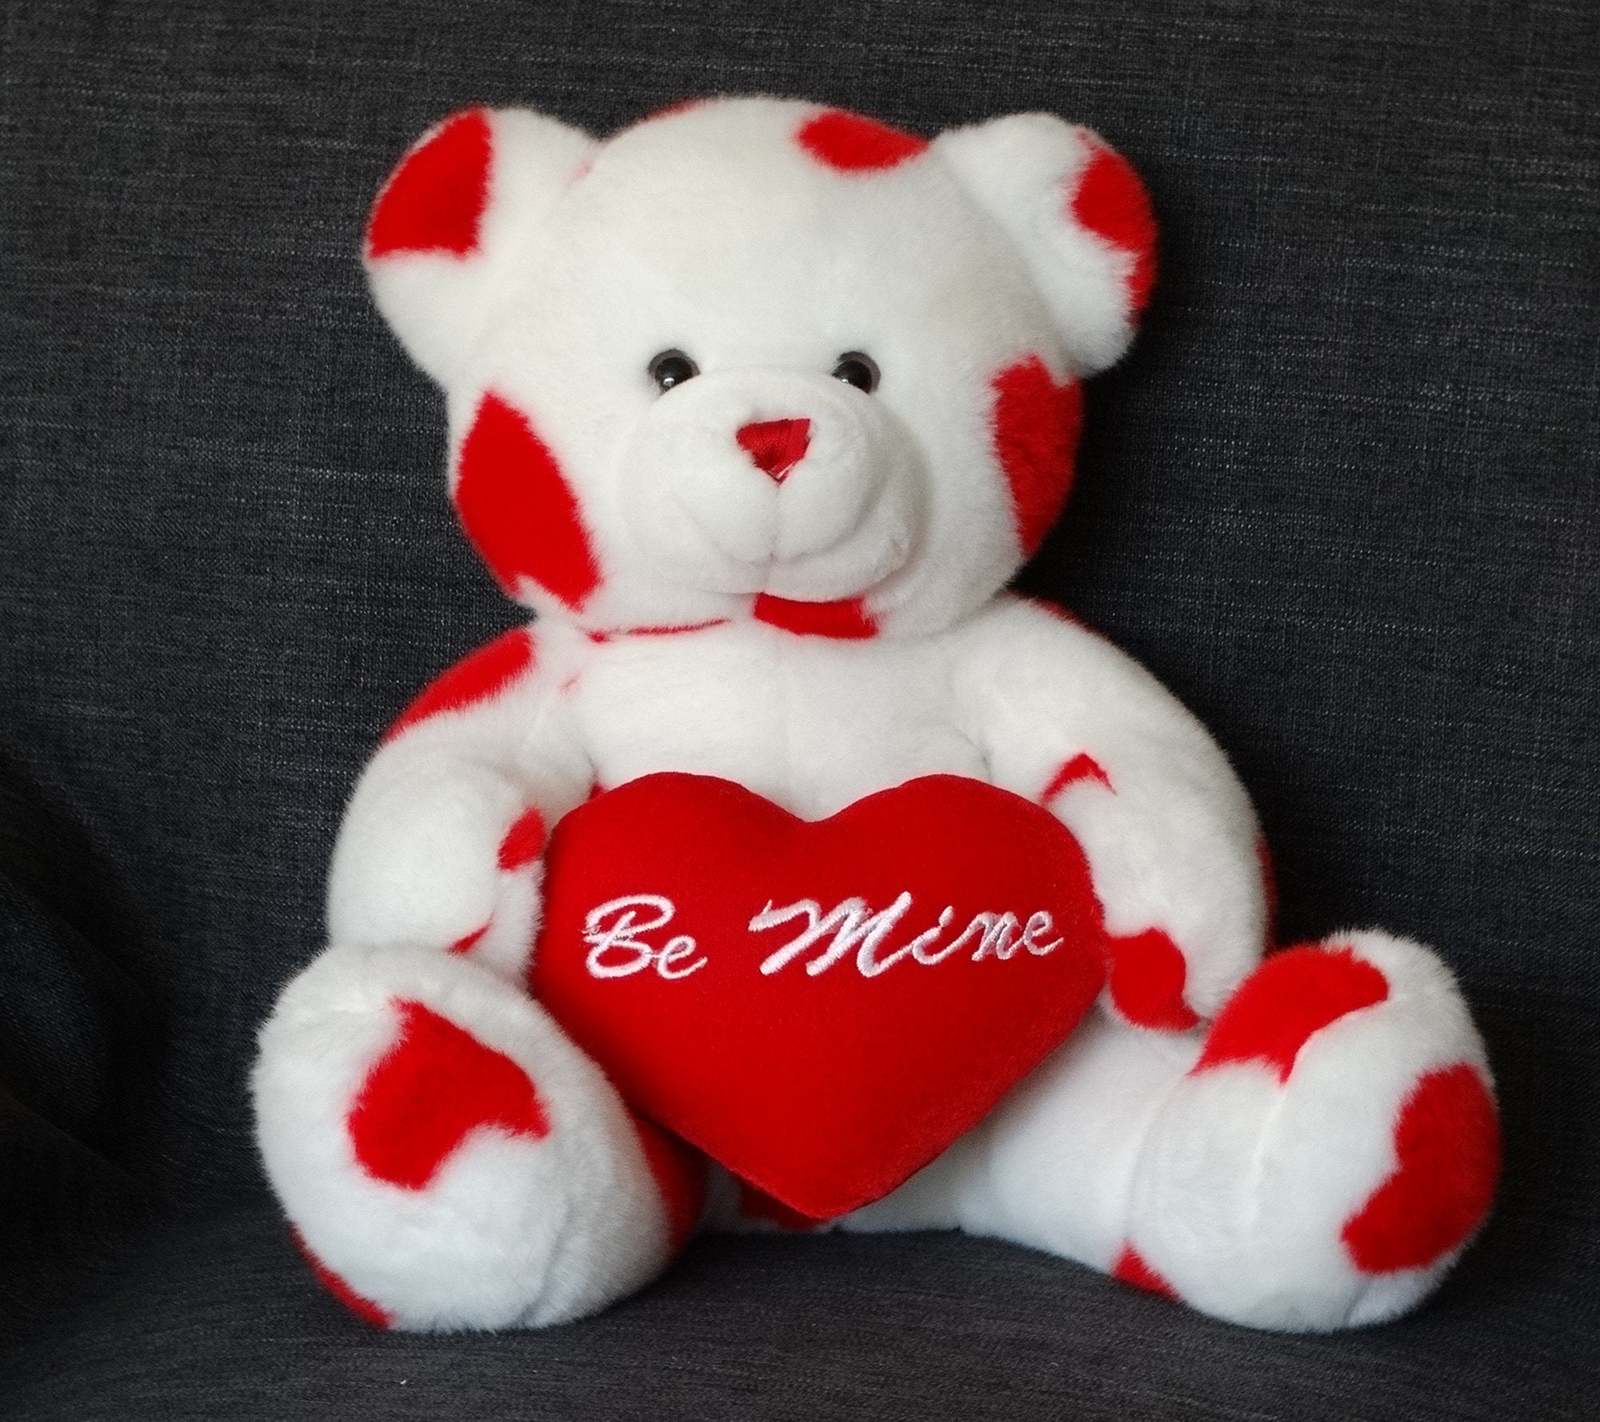 Vintage Carlton Cards "Be Mine" Teddy Bear with Red Hearts, Bear for Lovers - $38.88